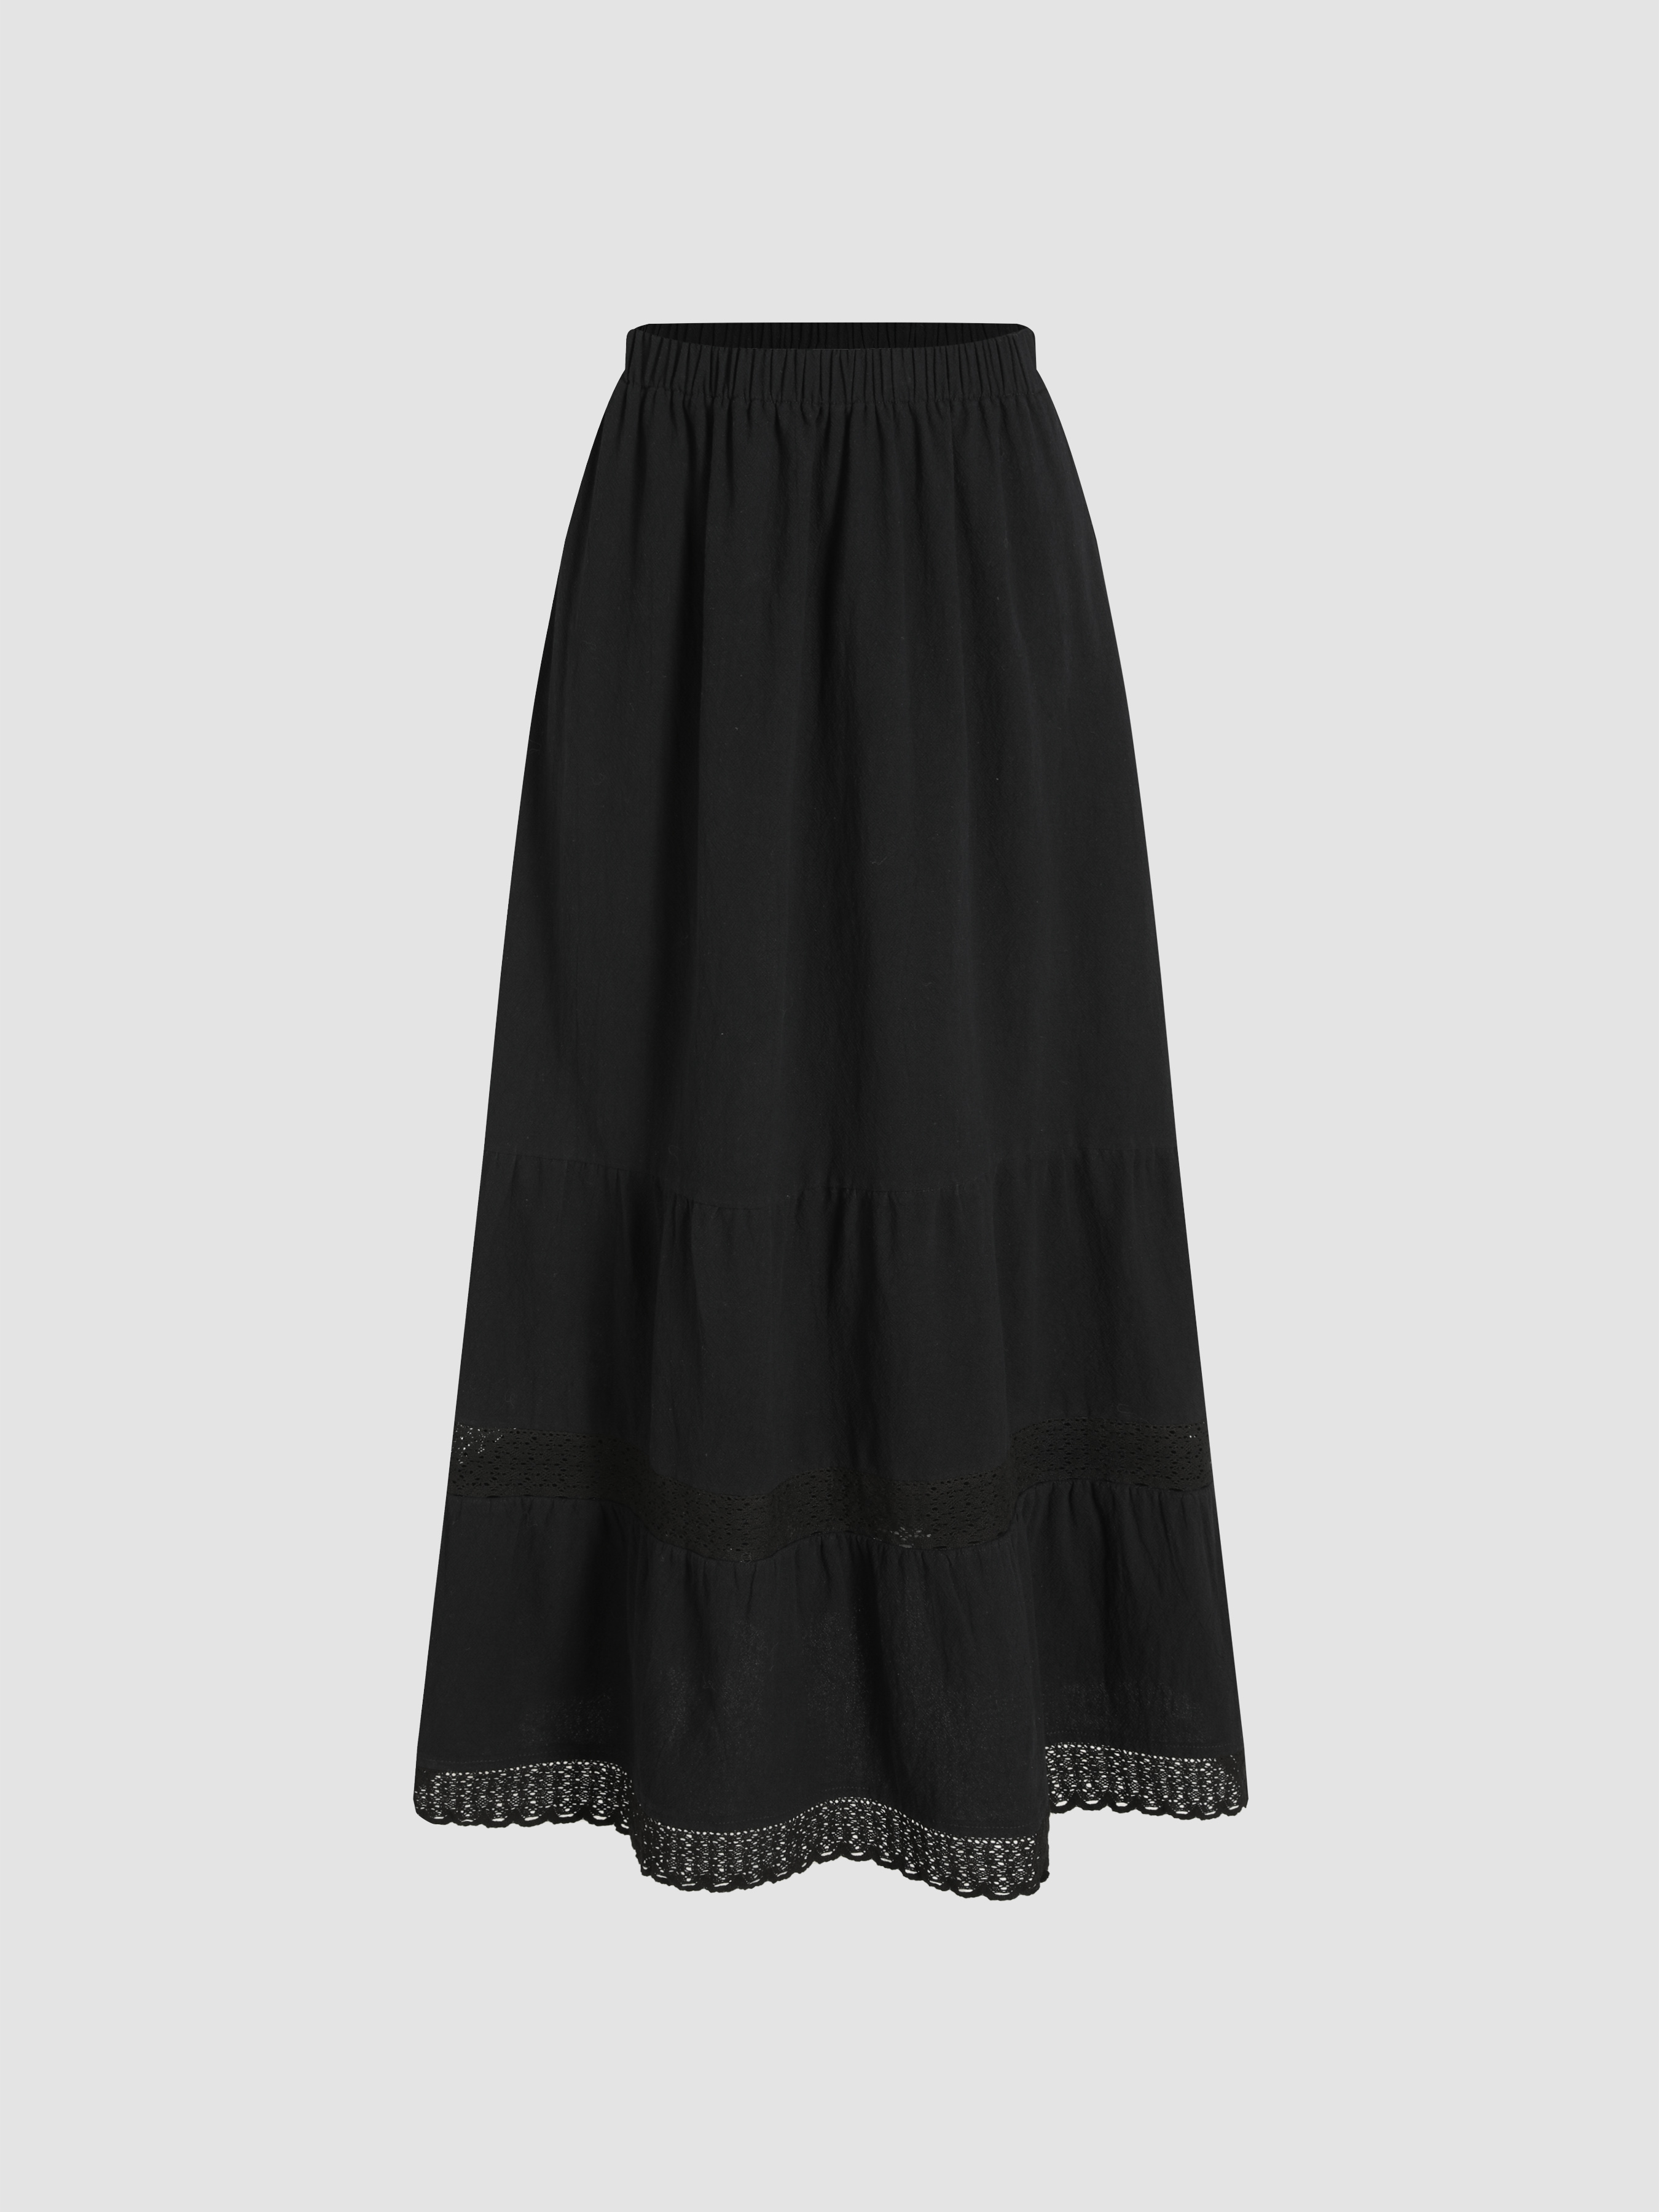 Jayde Black Lace Trim Maxi Skirt, | Shop Maxi Skirts by Beginning Boutique